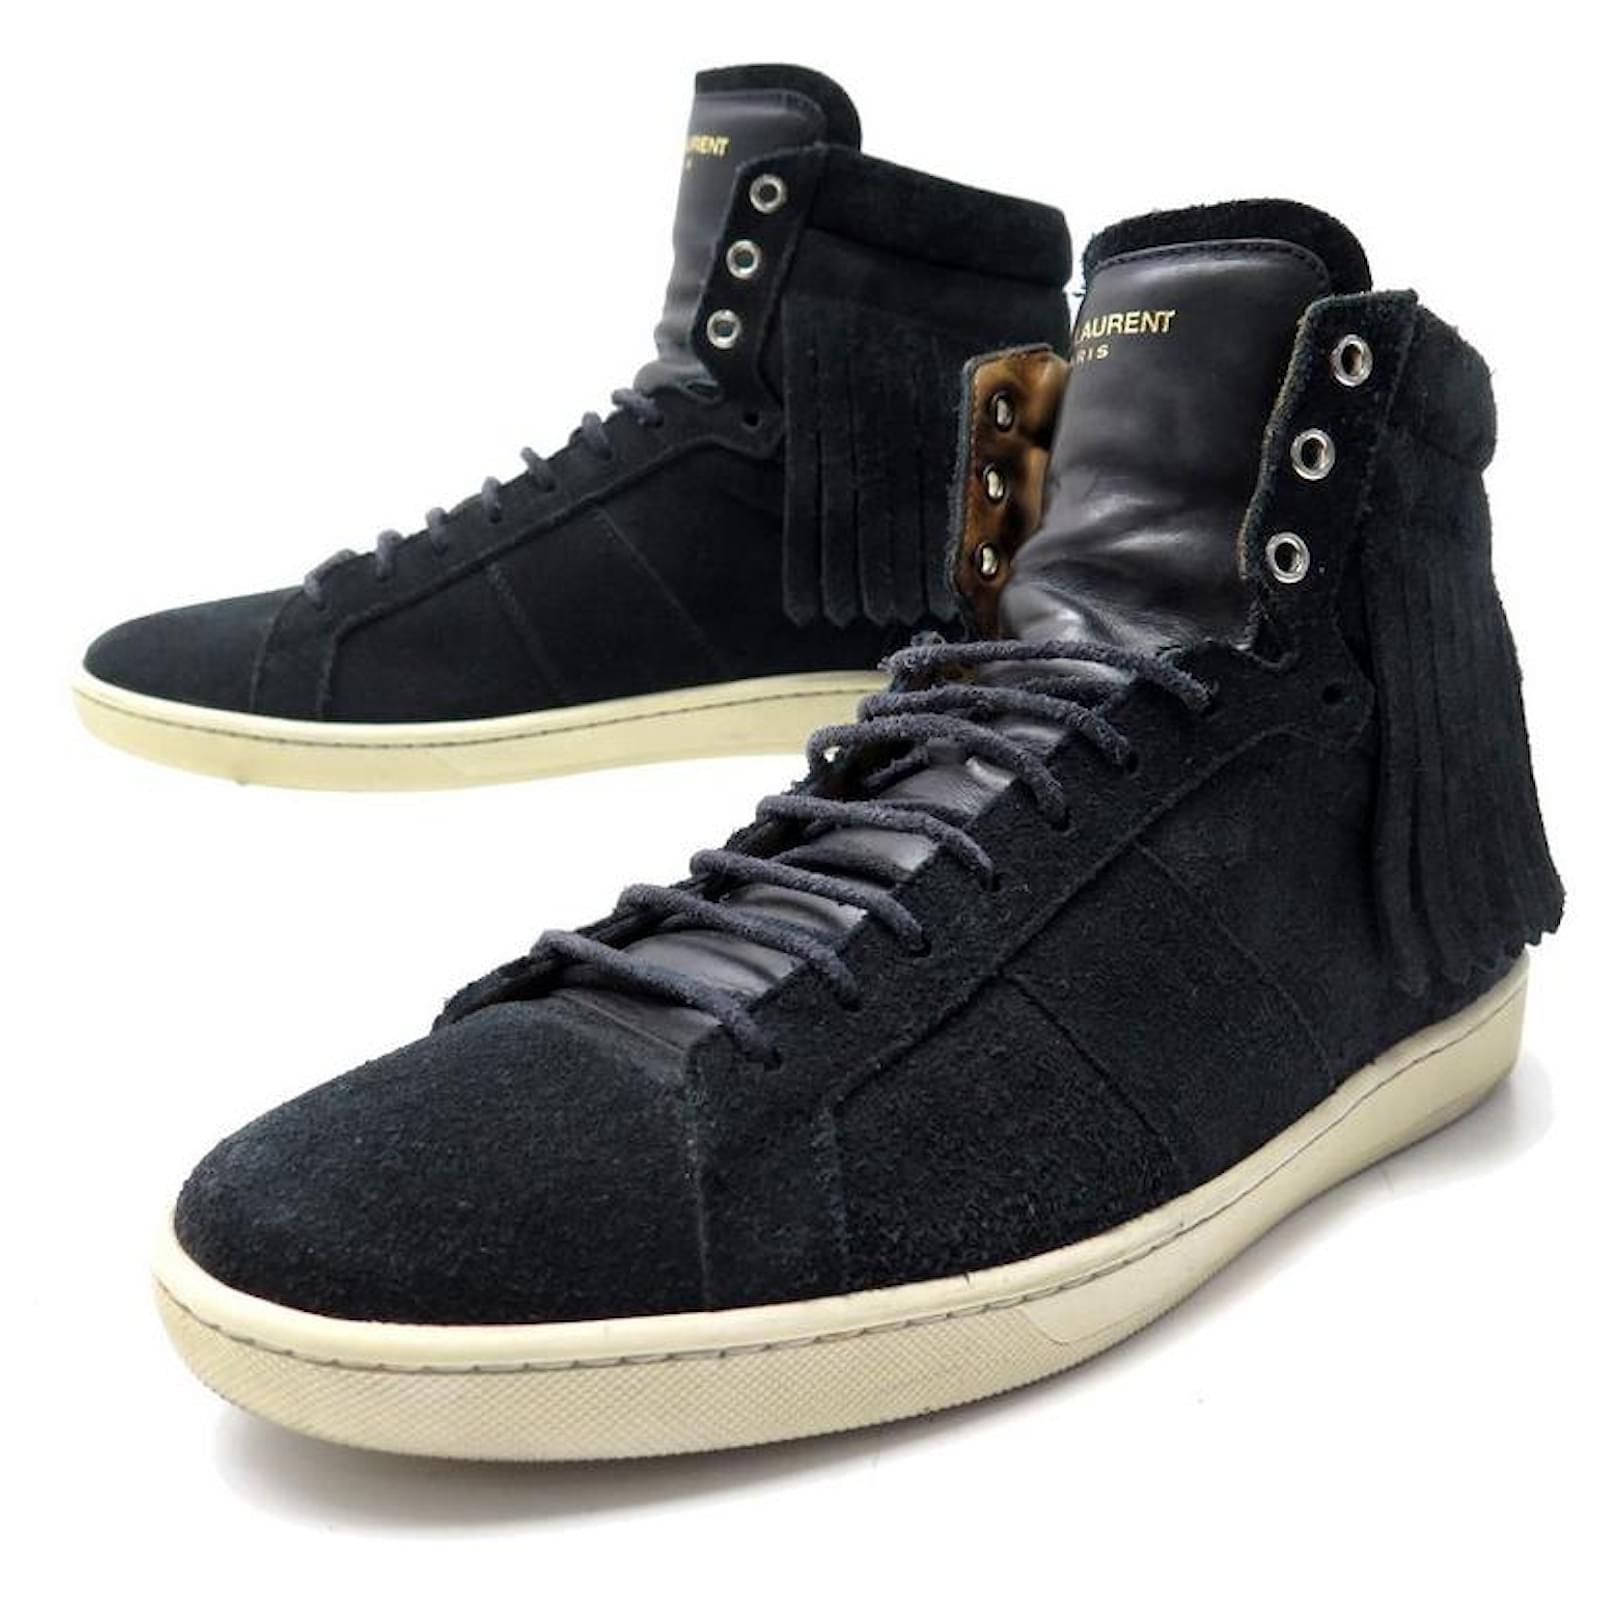 Buy Saint Laurent Shoes and Sneakers